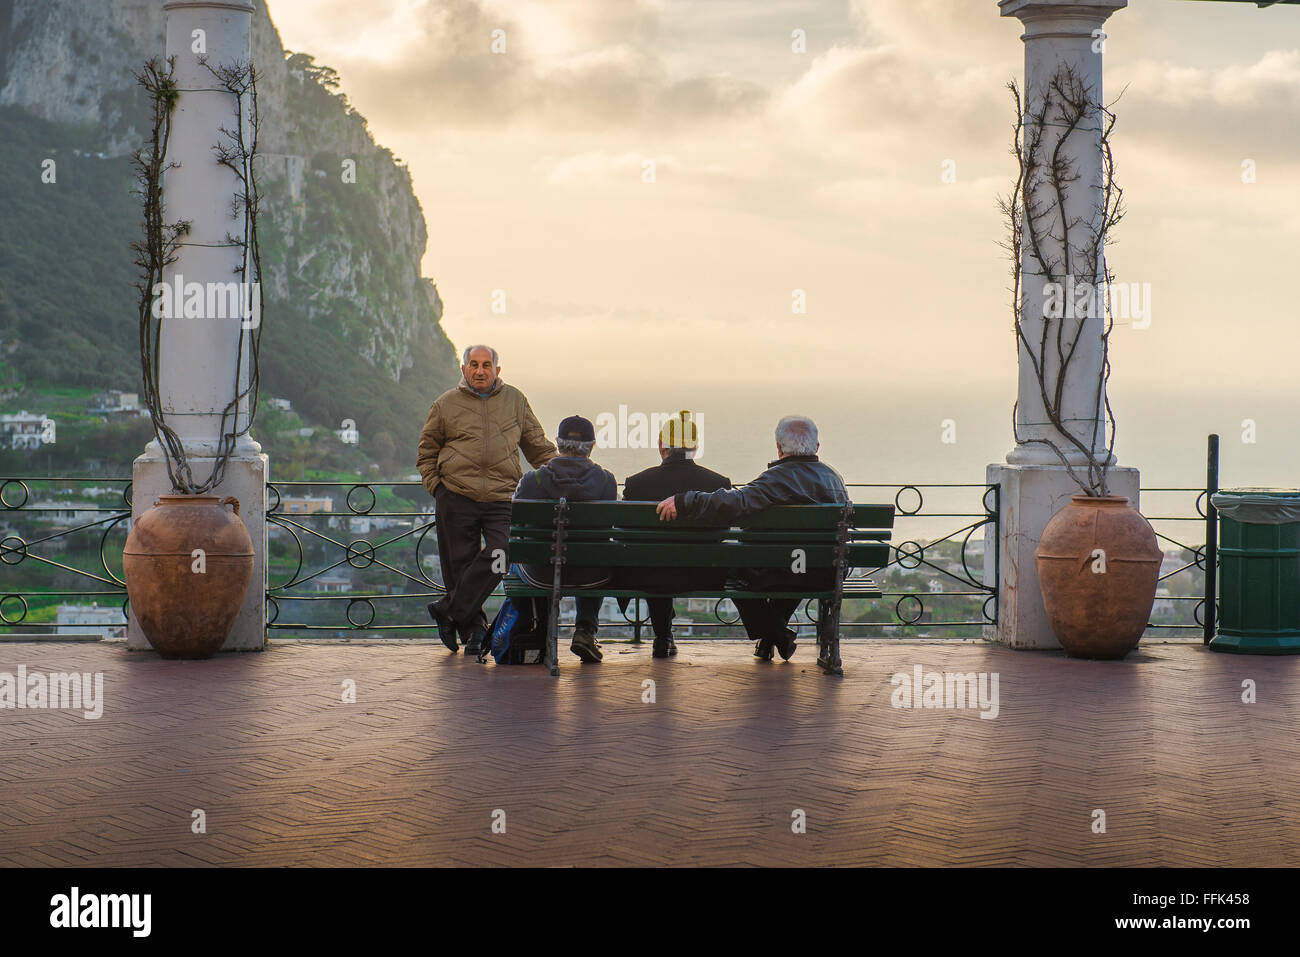 Senior men talking, view on a spring evening of a group of local men socialising on the Piazetta terrace at the centre of the town in Capri, Italy. Stock Photo